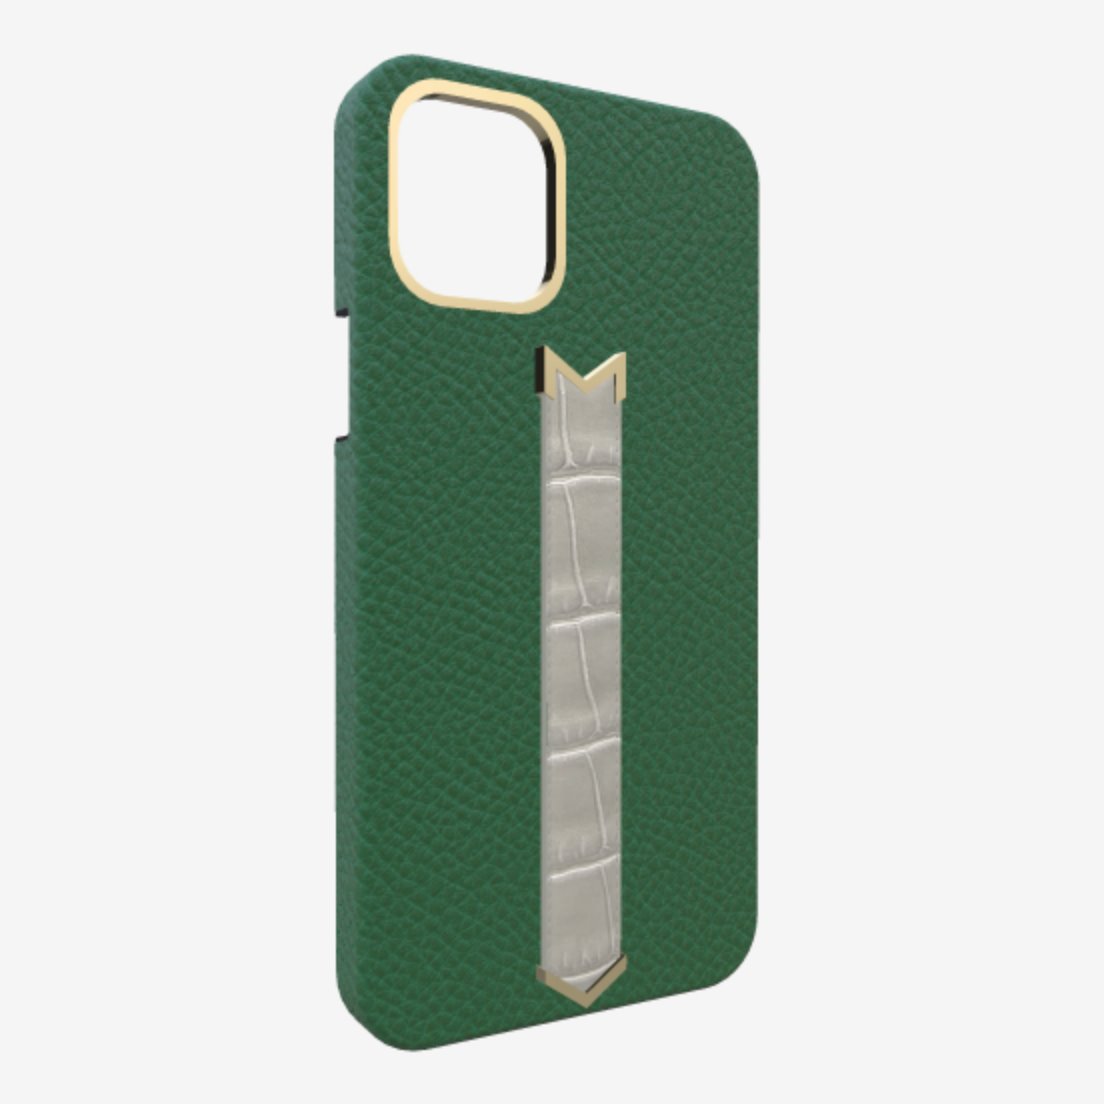 Gold Finger Strap Case for iPhone 13 Pro in Genuine Calfskin and Alligator Emerald Green Pearl Grey 